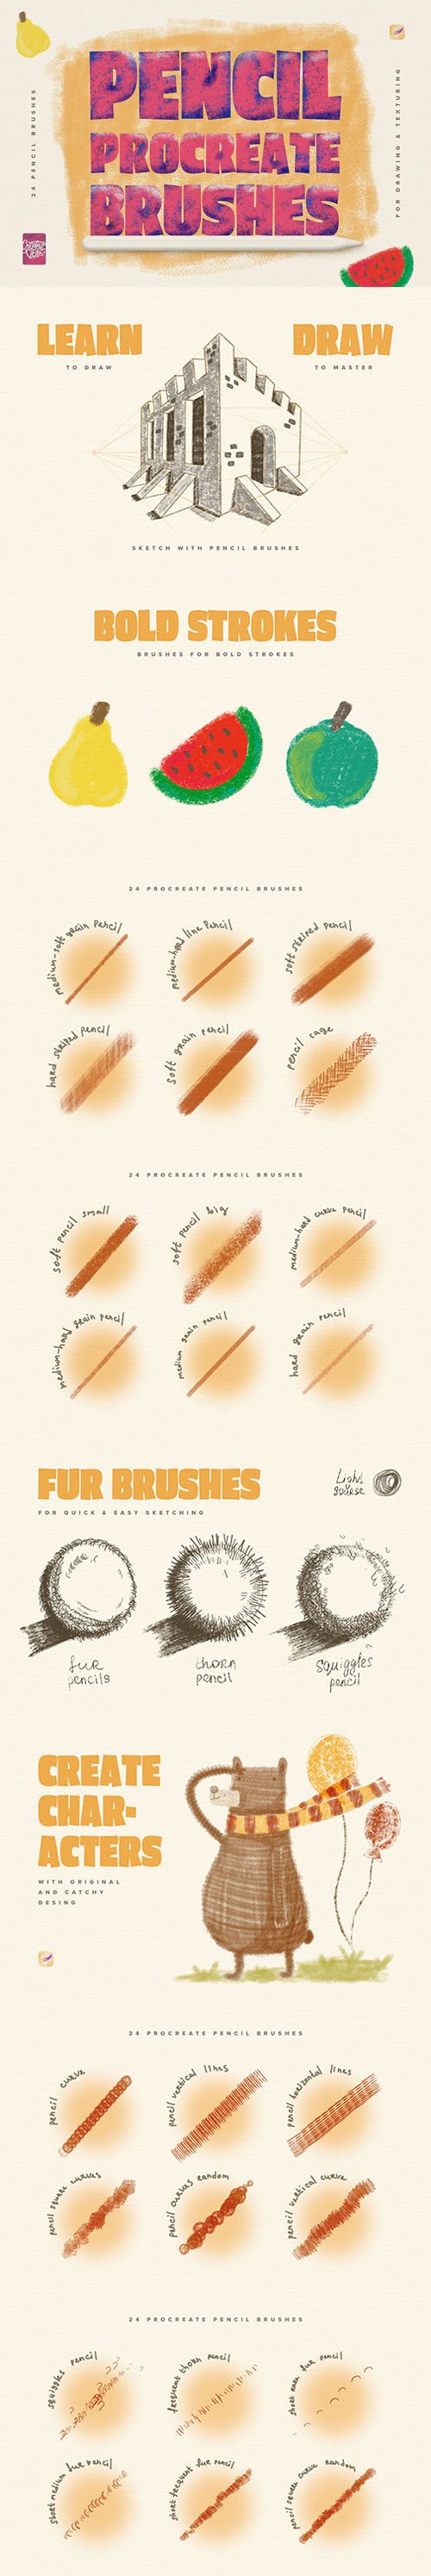 24 Pencil Brushes for Procreate